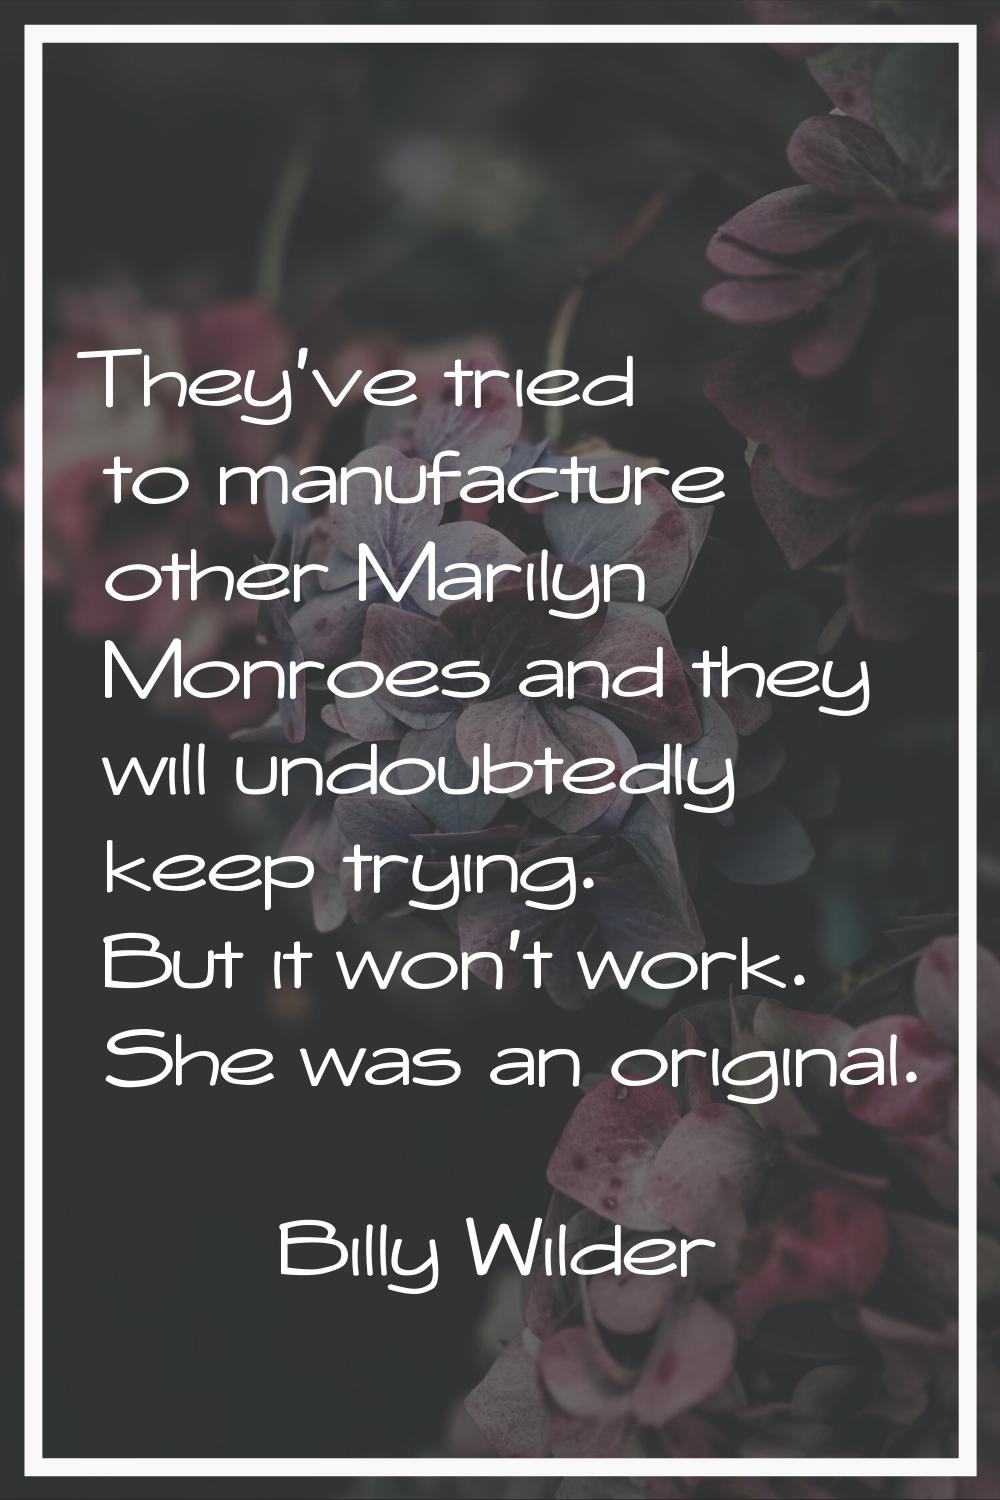 They've tried to manufacture other Marilyn Monroes and they will undoubtedly keep trying. But it wo